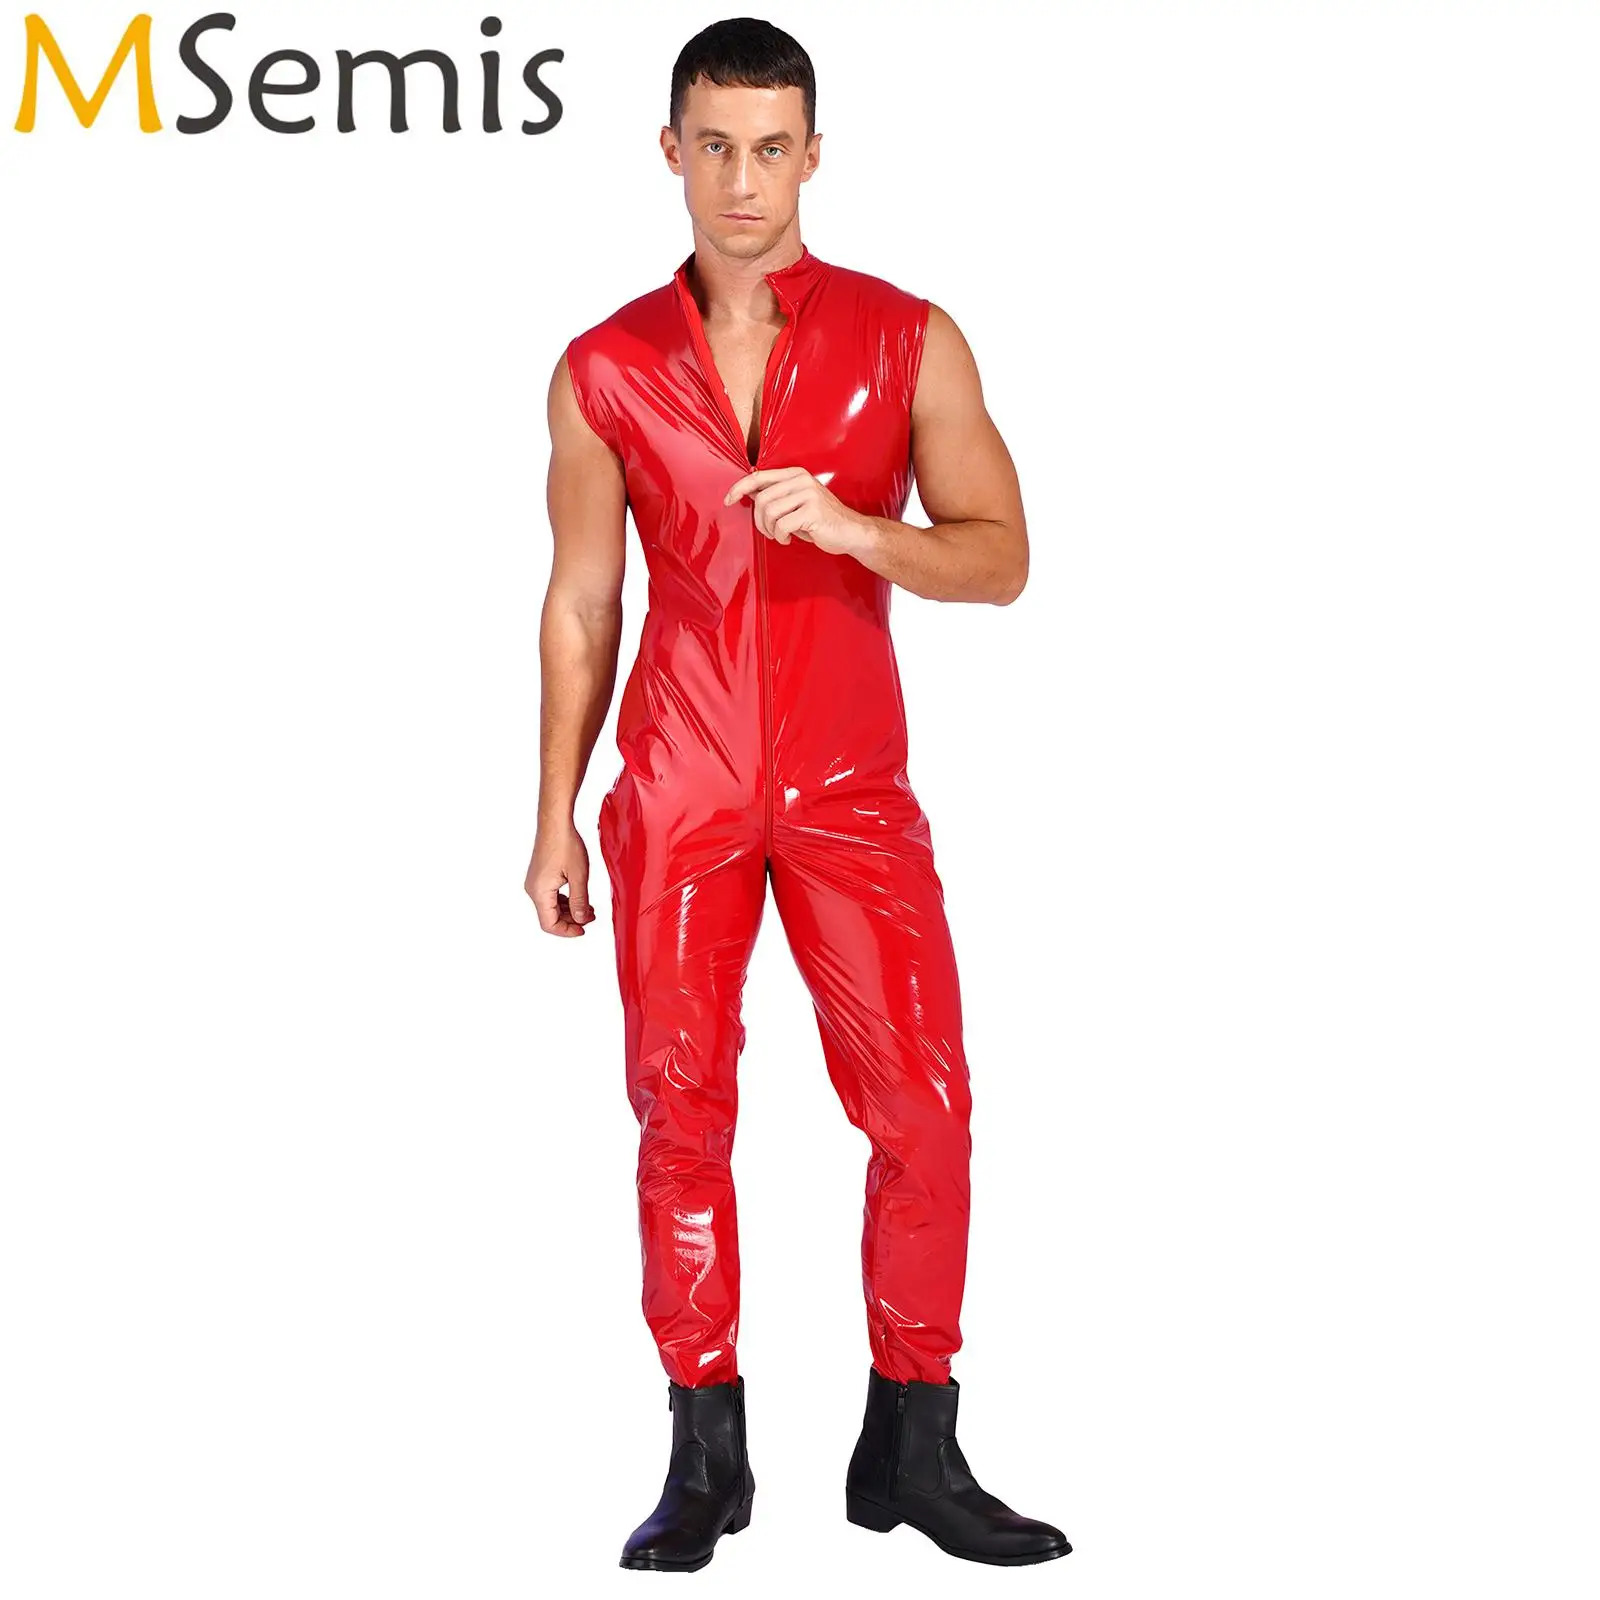 

Skinny jumpsuit sexy Mens Rave Party Outfit Patent Leather Zipper Crotch Full Bodysuit Wet Look Stand Collar Catsuit Clubwear